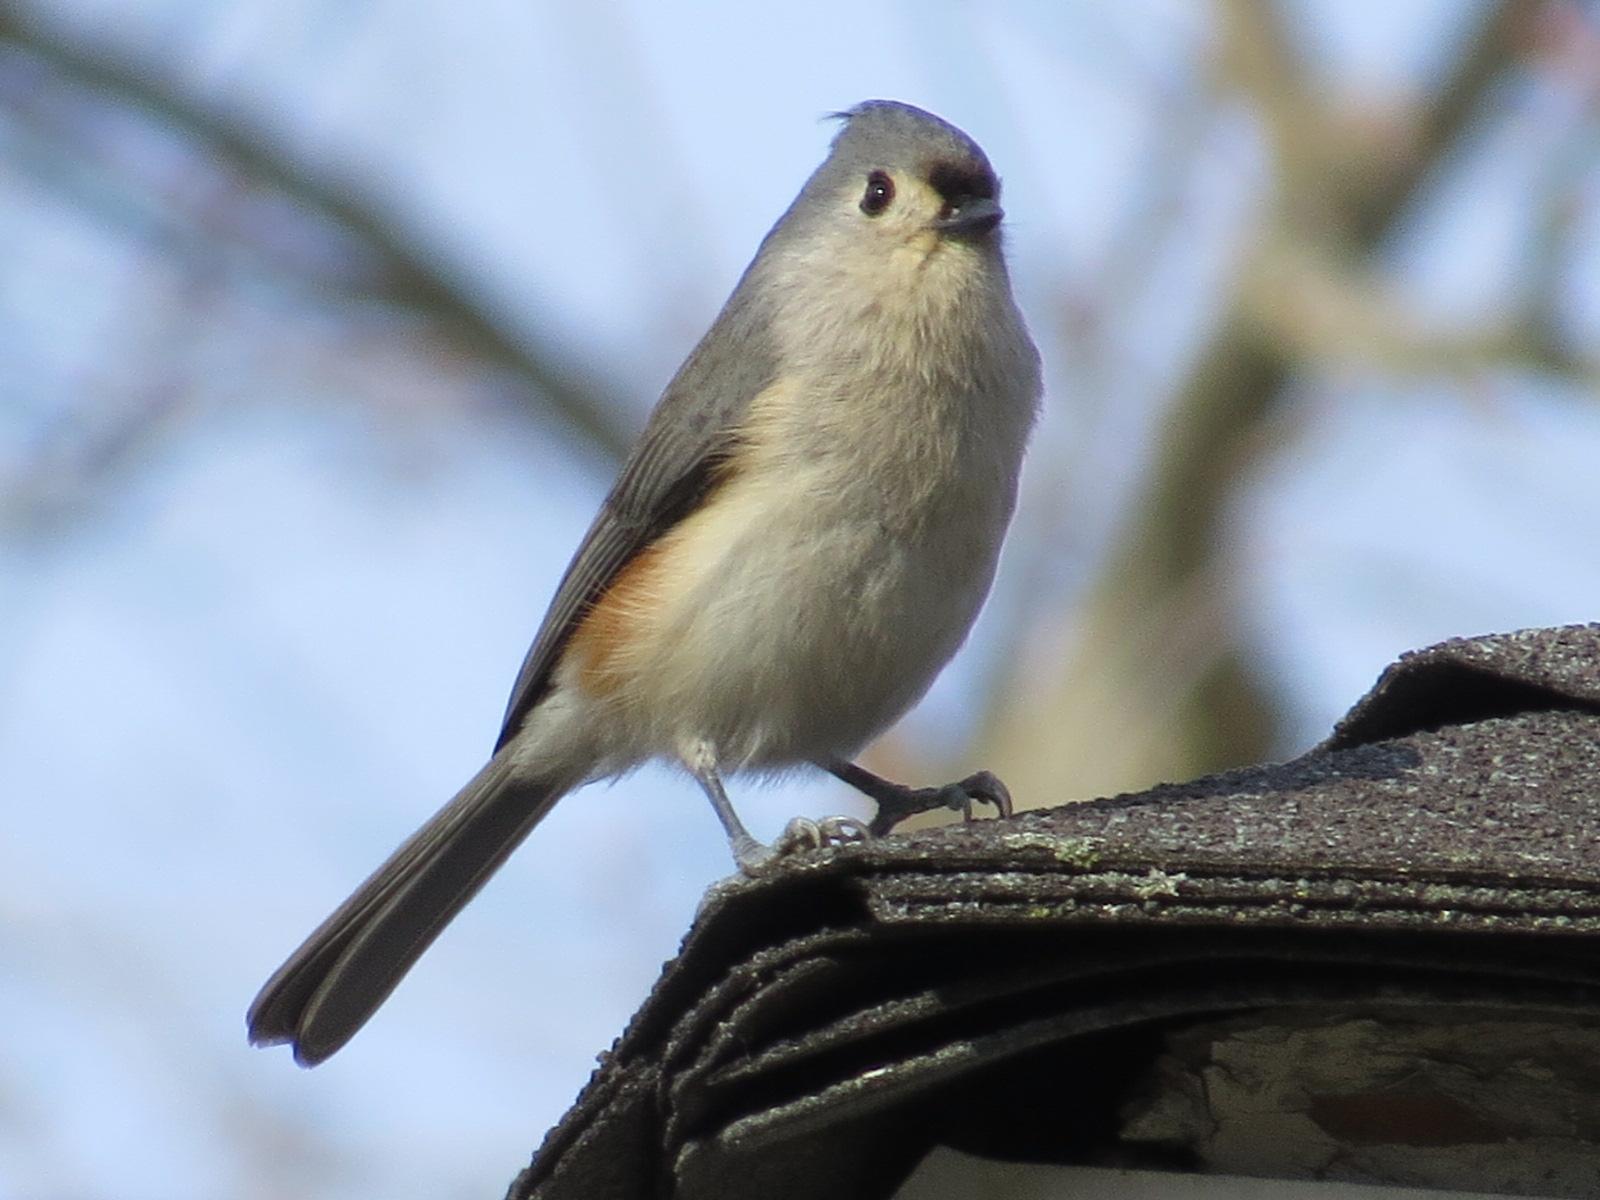 Tufted Titmouse Photo by Kathy Wooding